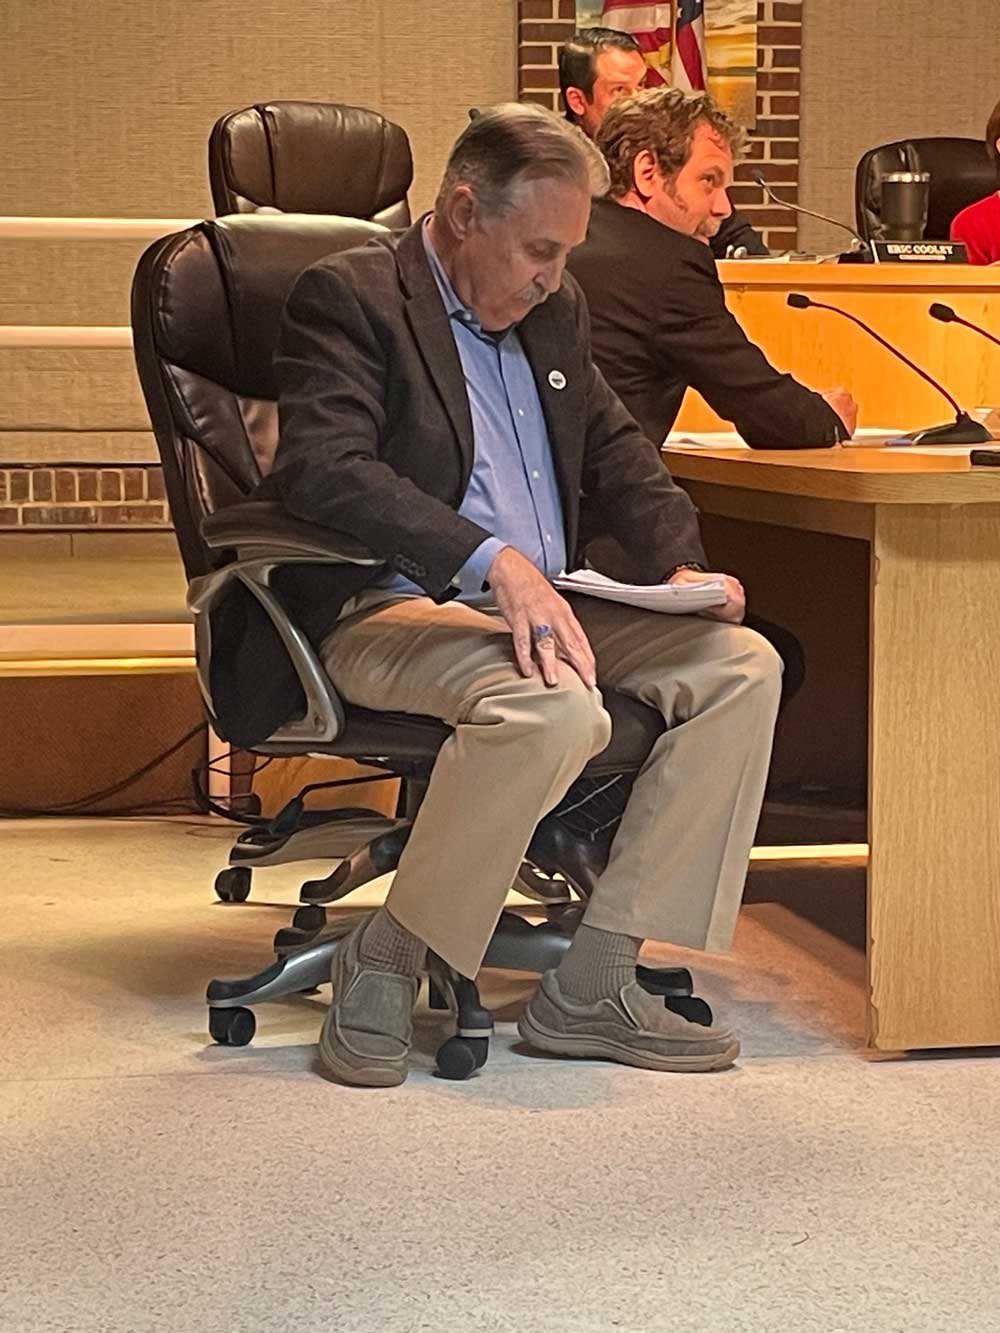 William Whitson this evening, immediately after the city commission's 4-1 vote to fire him. Commissioner Eric Cooley is in the background. (© FlaglerLive)